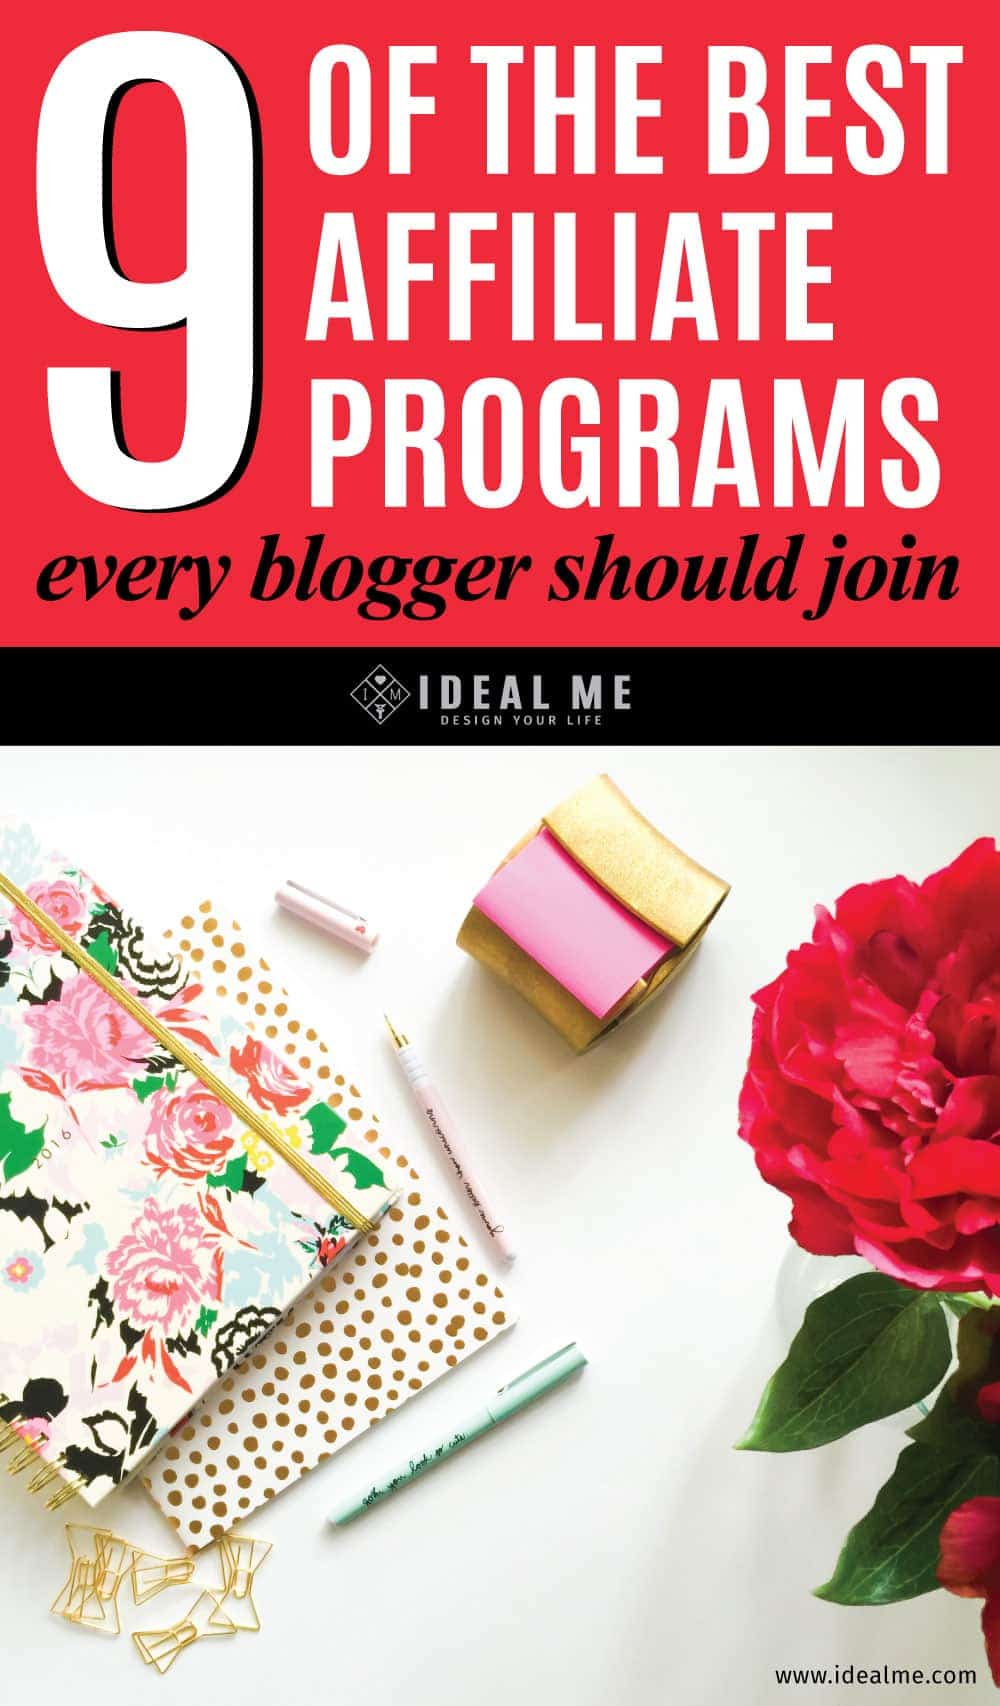 How do you choose which affiliate programs are right for your business? Check out 9 of the best affiliate programs every blogger should join.